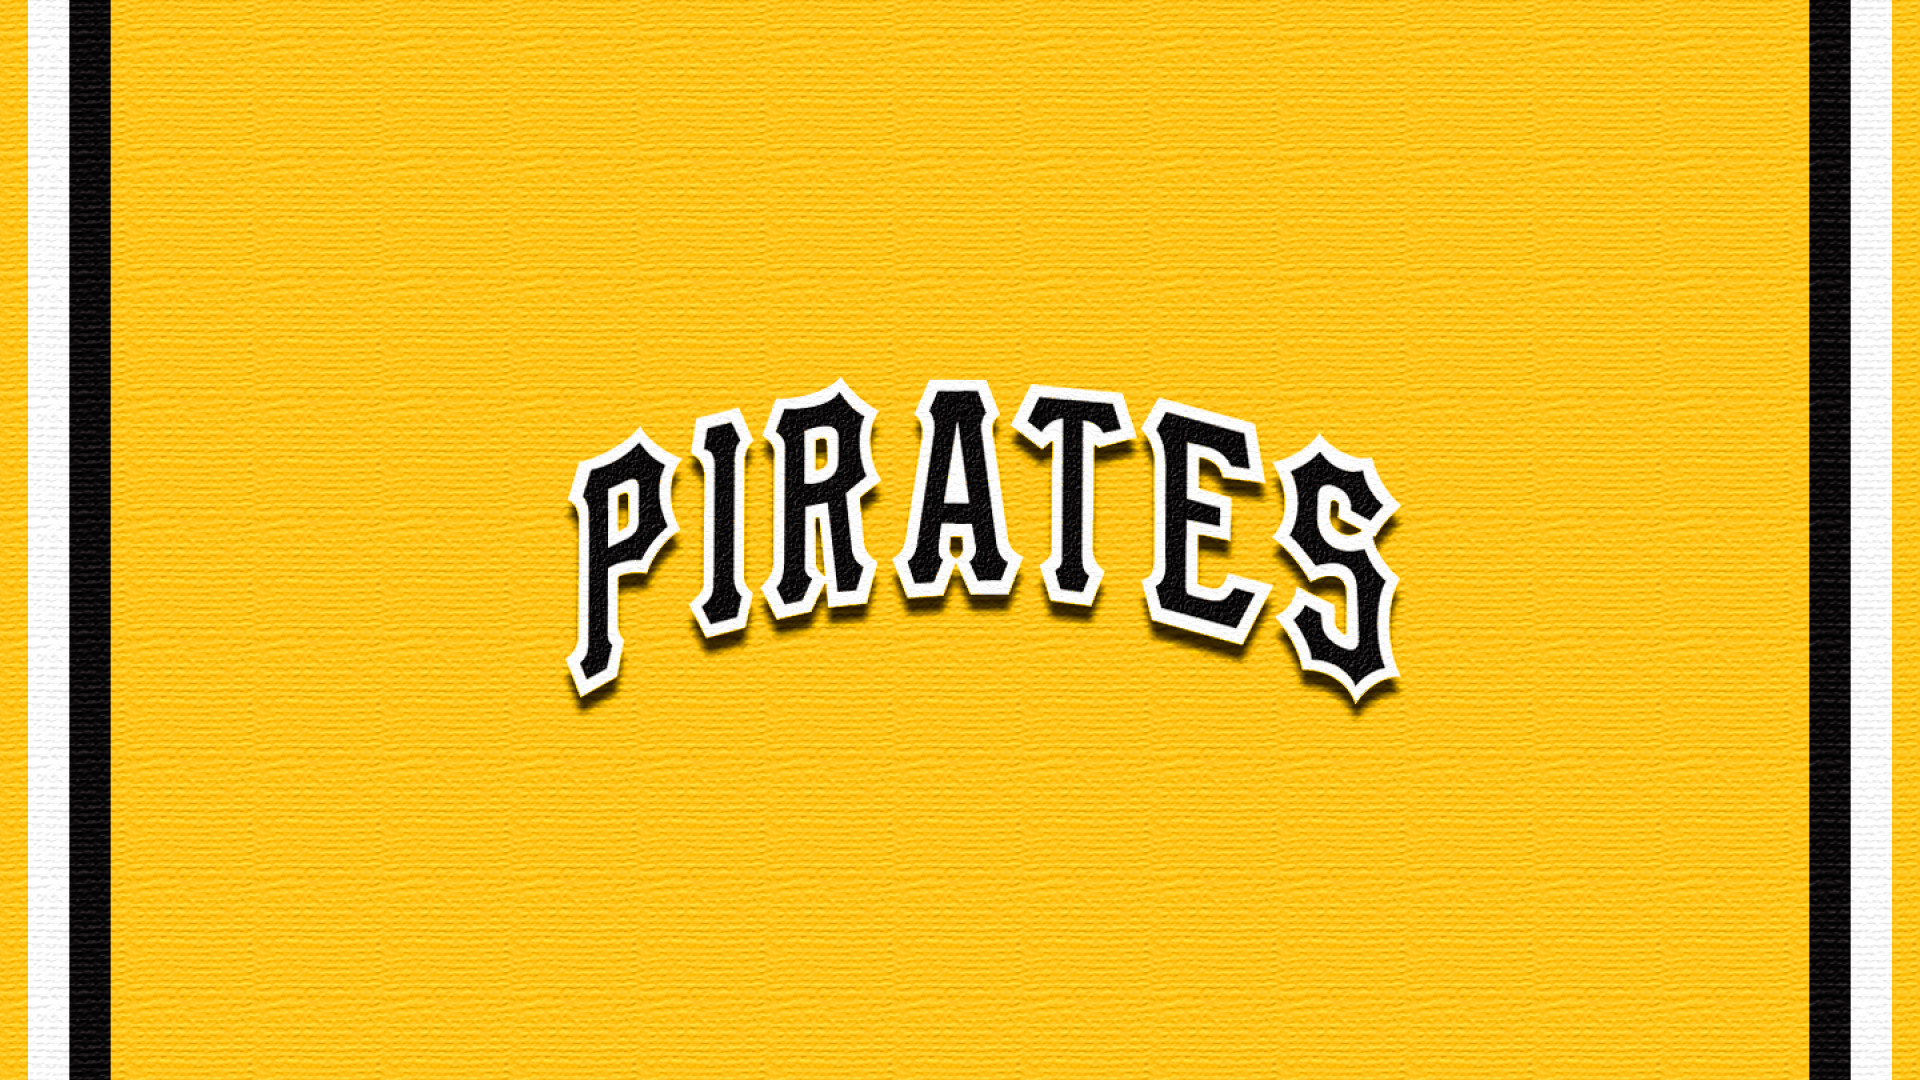 Pittsburgh Pirates HD Wallpaper HD Wallpapers, HD Backgrounds